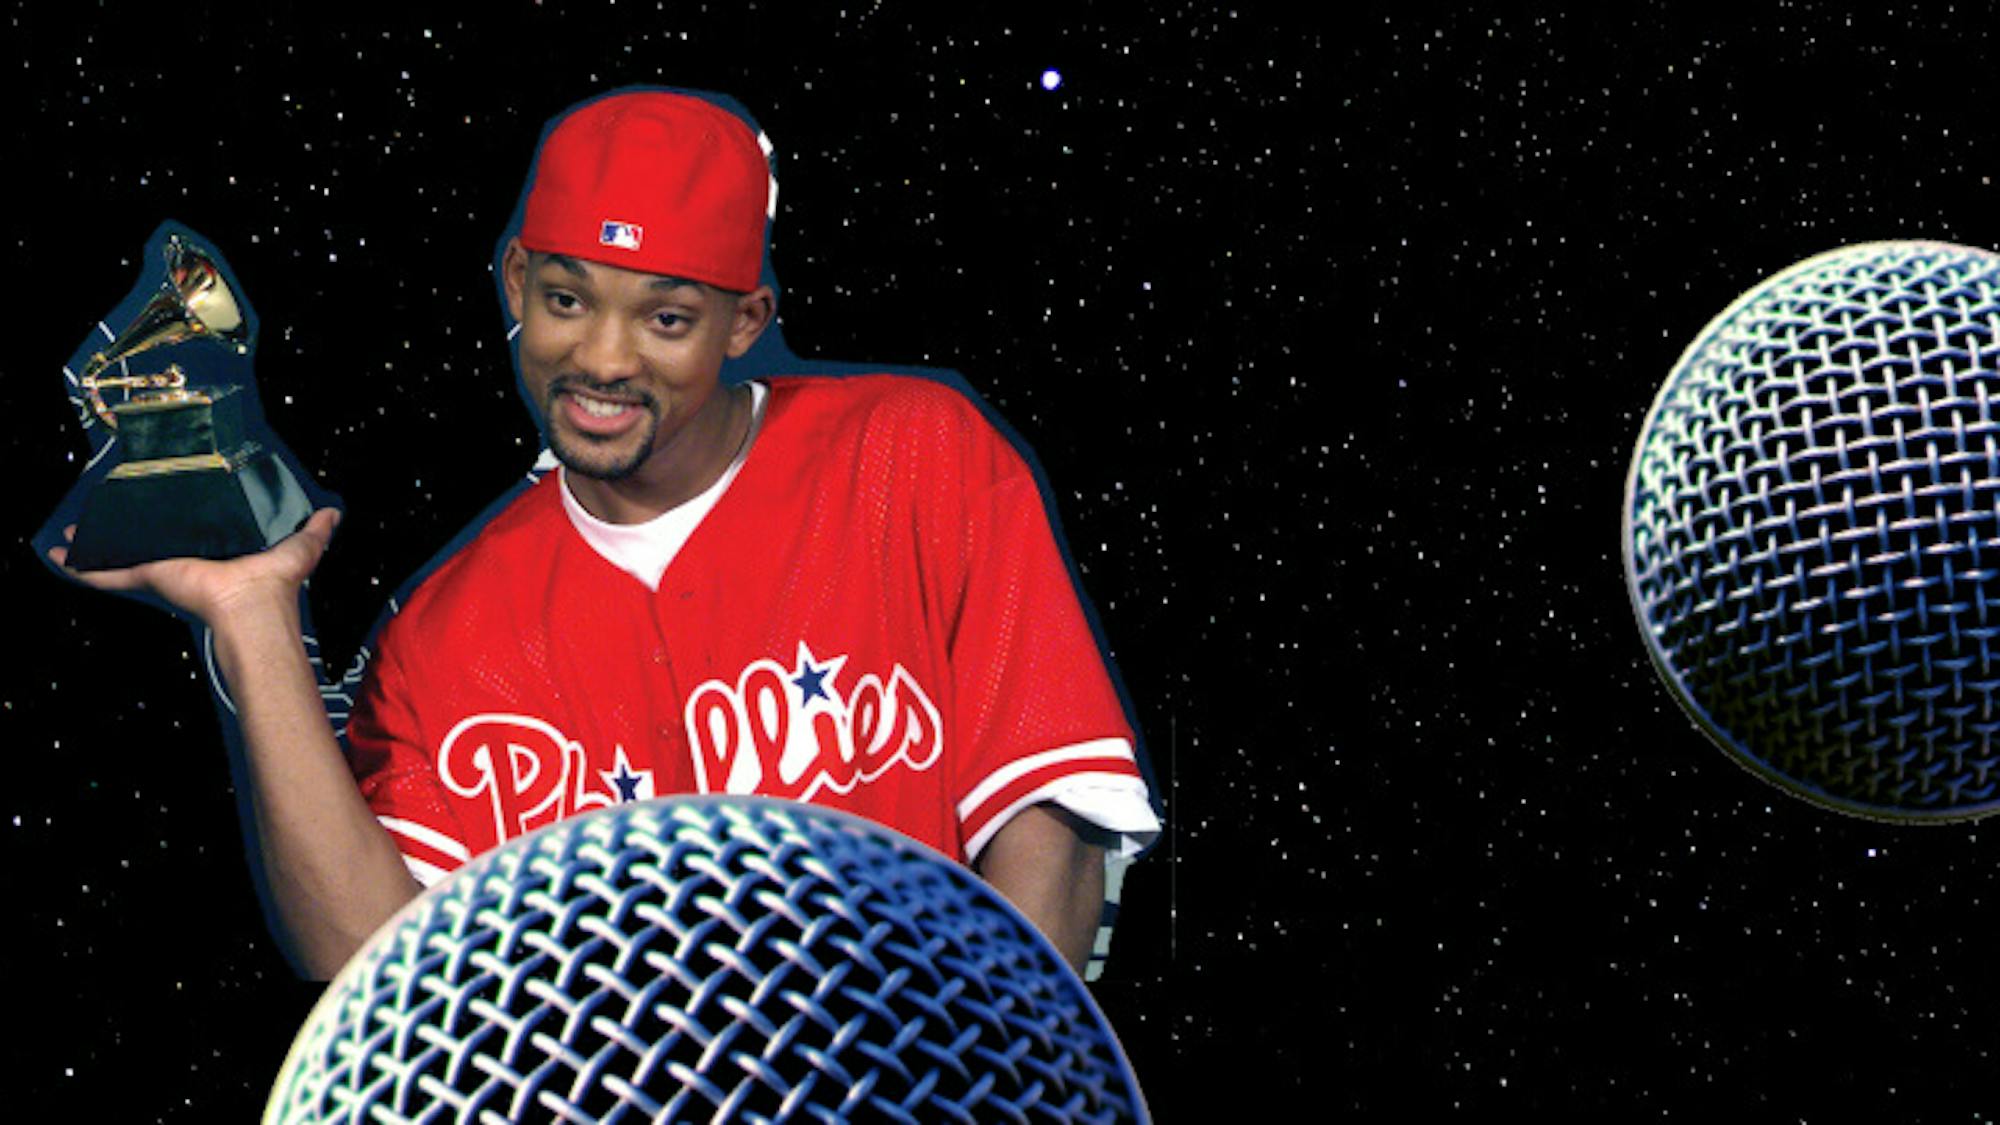 Will Smith hovers above a microphone planet with a Grammy perched casually on his palm. He reps the Phillies with both jersey and hat.